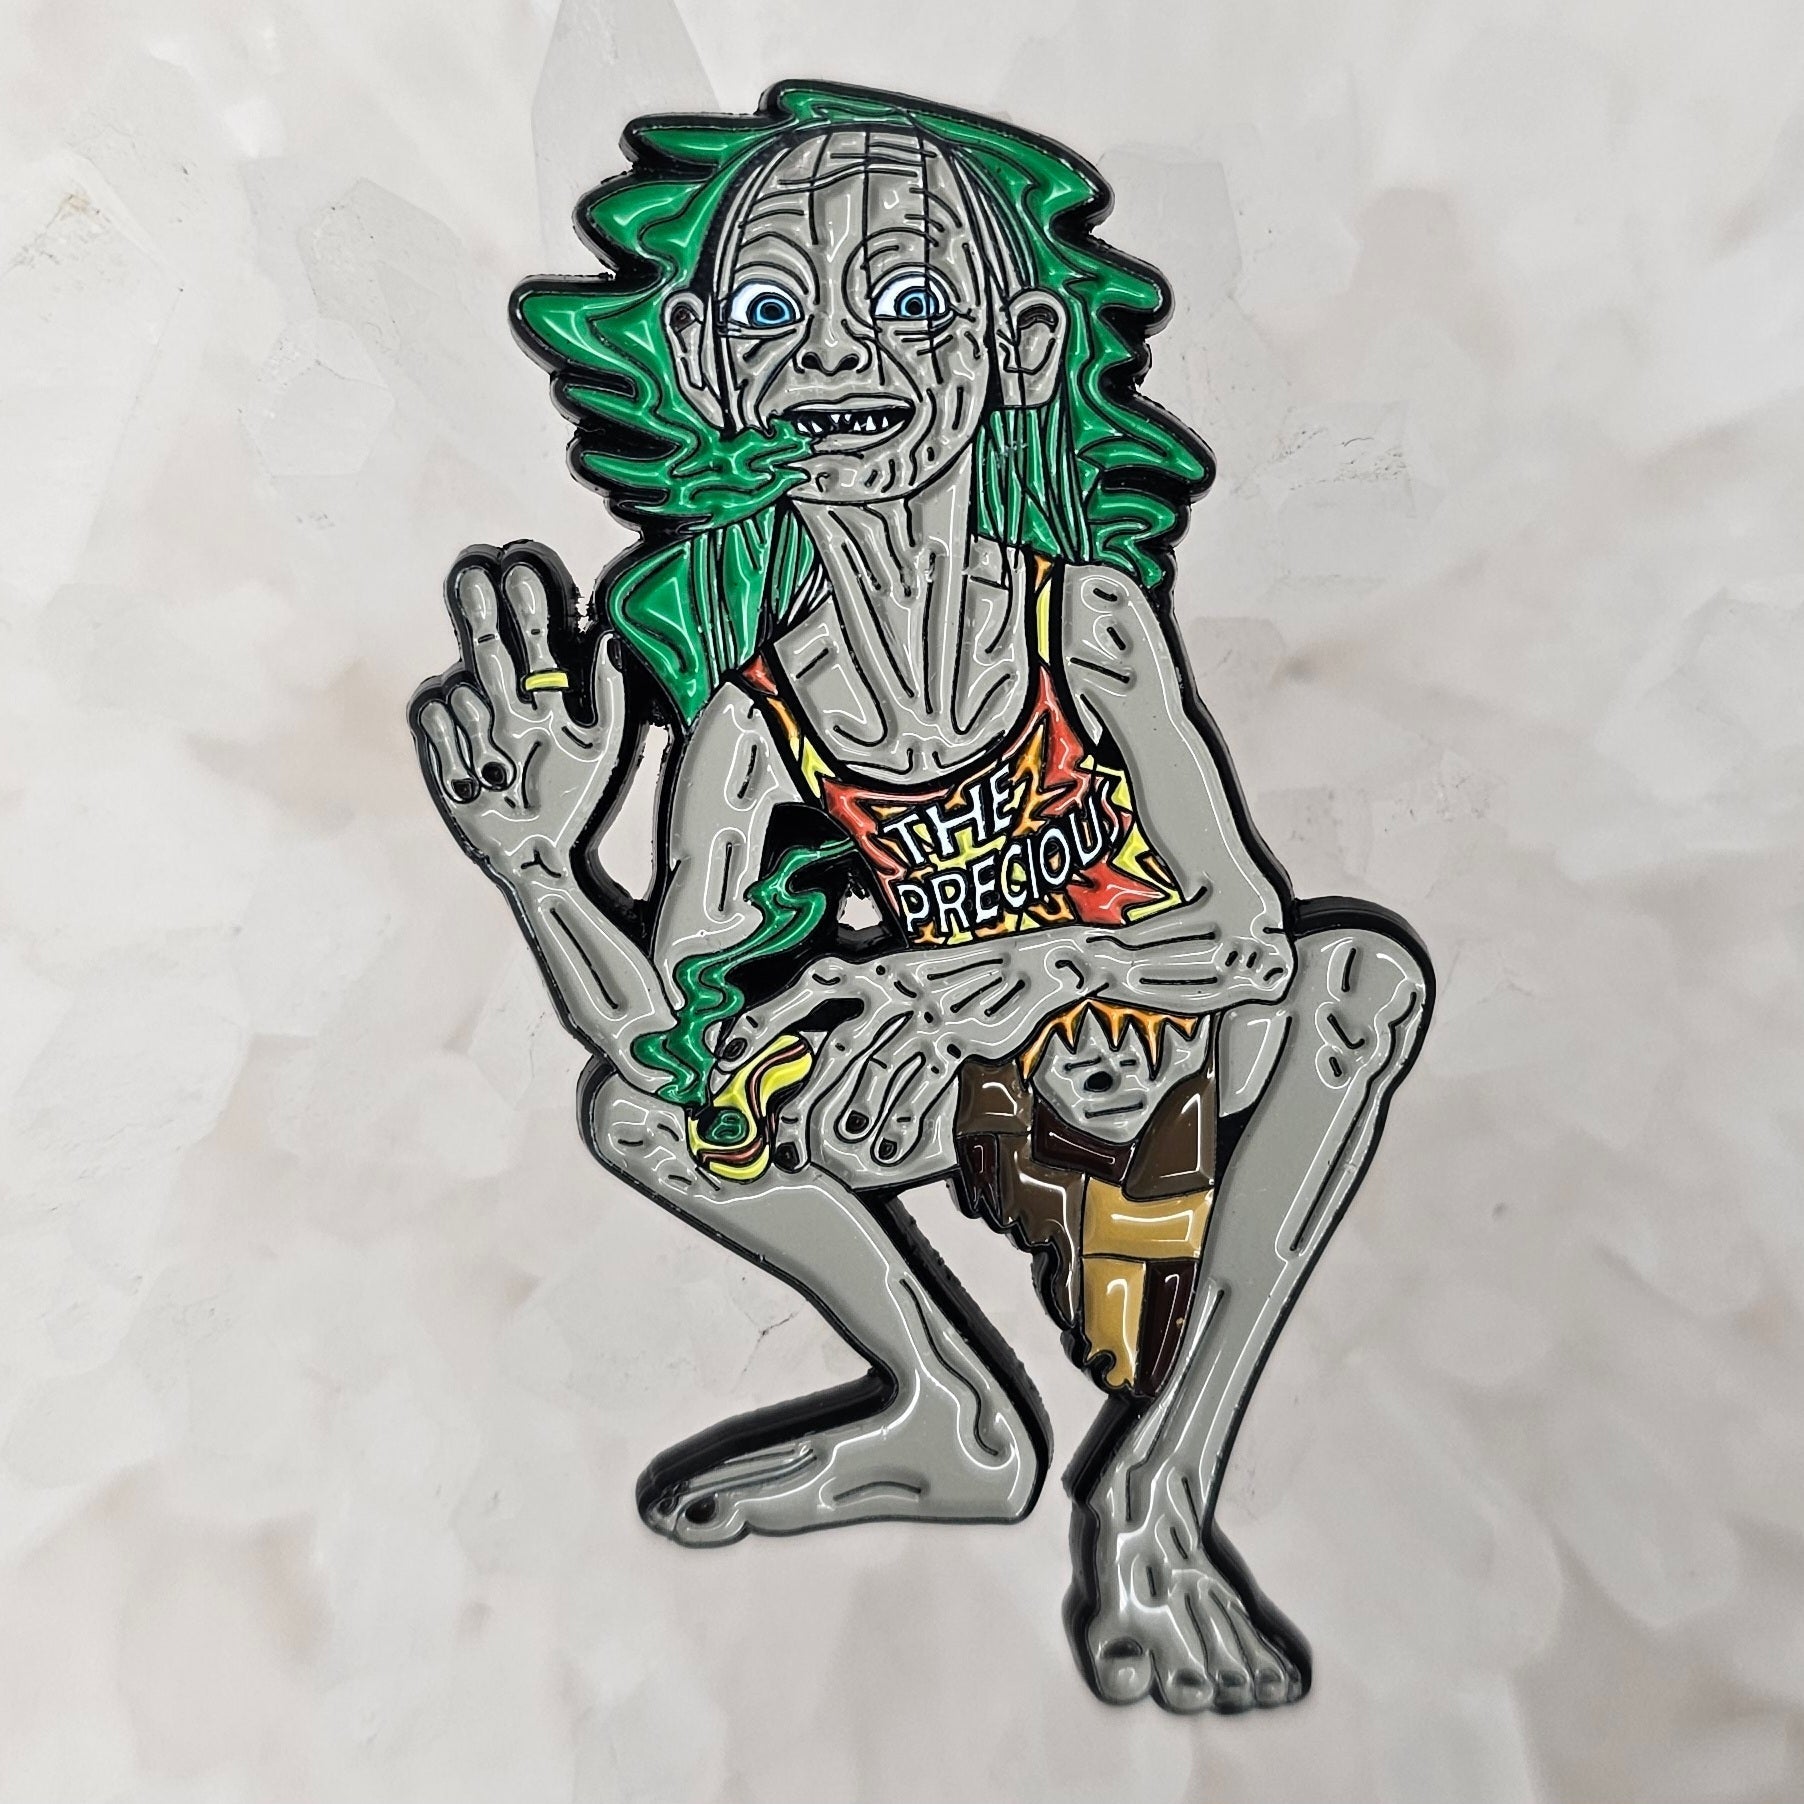 5 Pack - Festie Smeagol The Precious Hippie Lord Of The Weed Gollum Smoke Rings Stoner Wholesale Enamel Pins Hat Pins Bulk Lapel Pin Brooch Badge Festival Pin